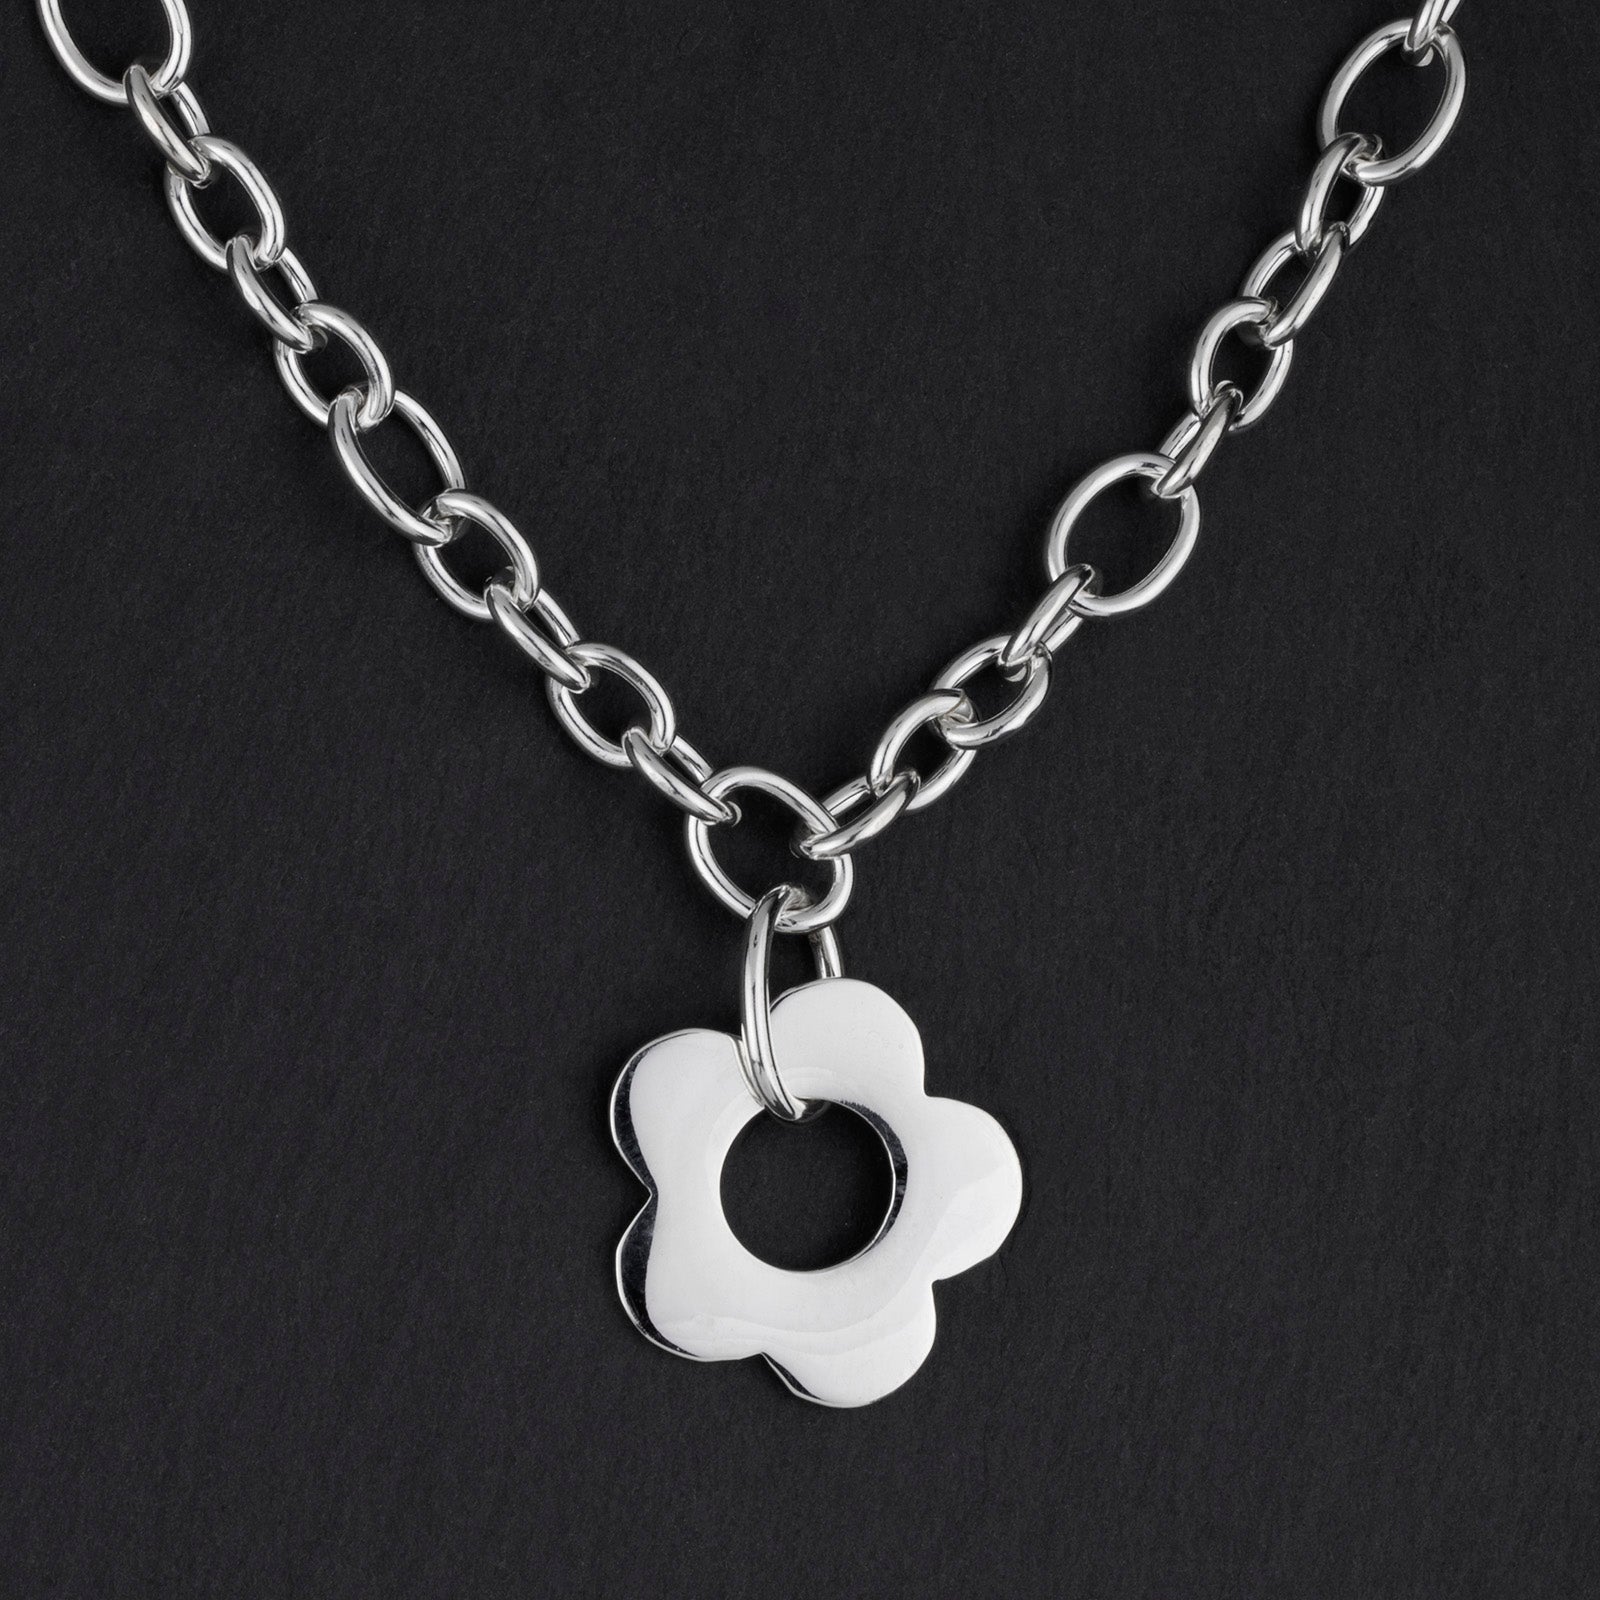 chunky silver daisy flower power chain necklace